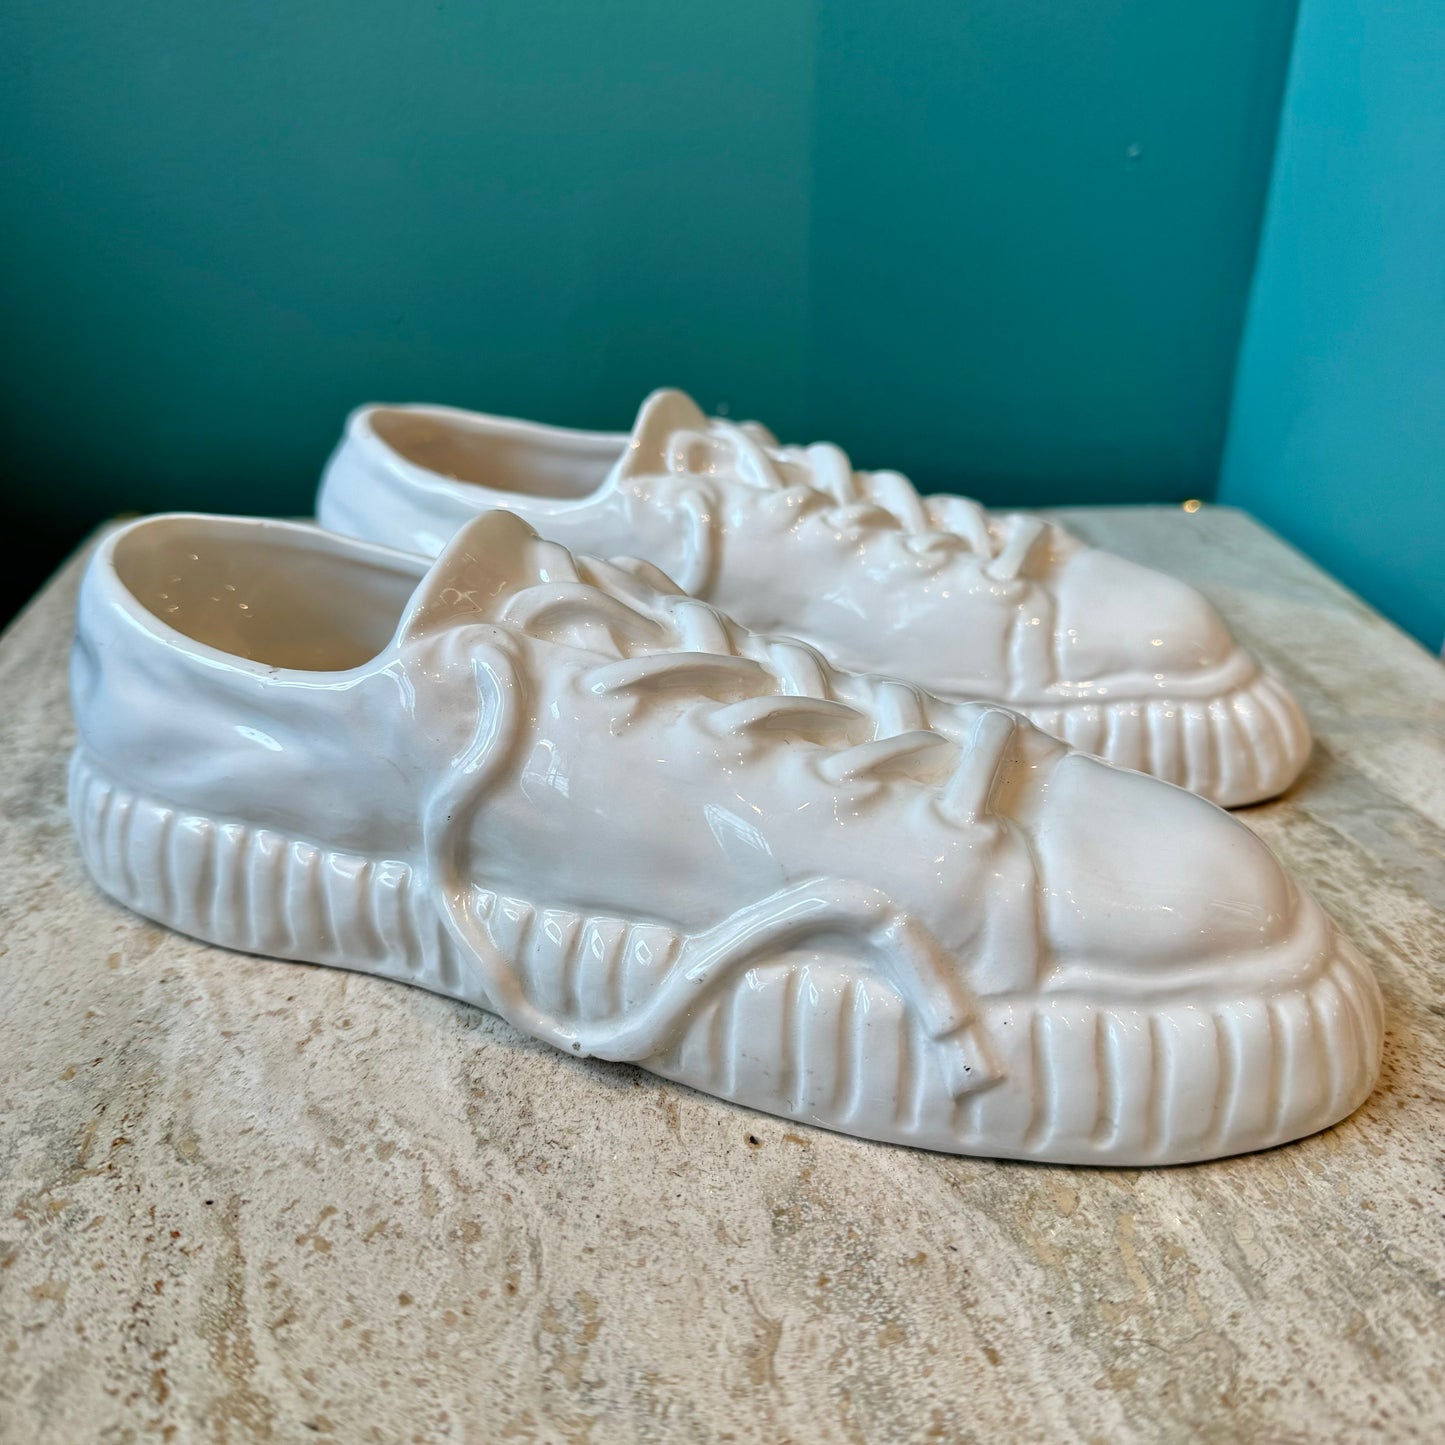 Pair of Vintage Ceramic Sneaker Planters by Fitz and Floyd